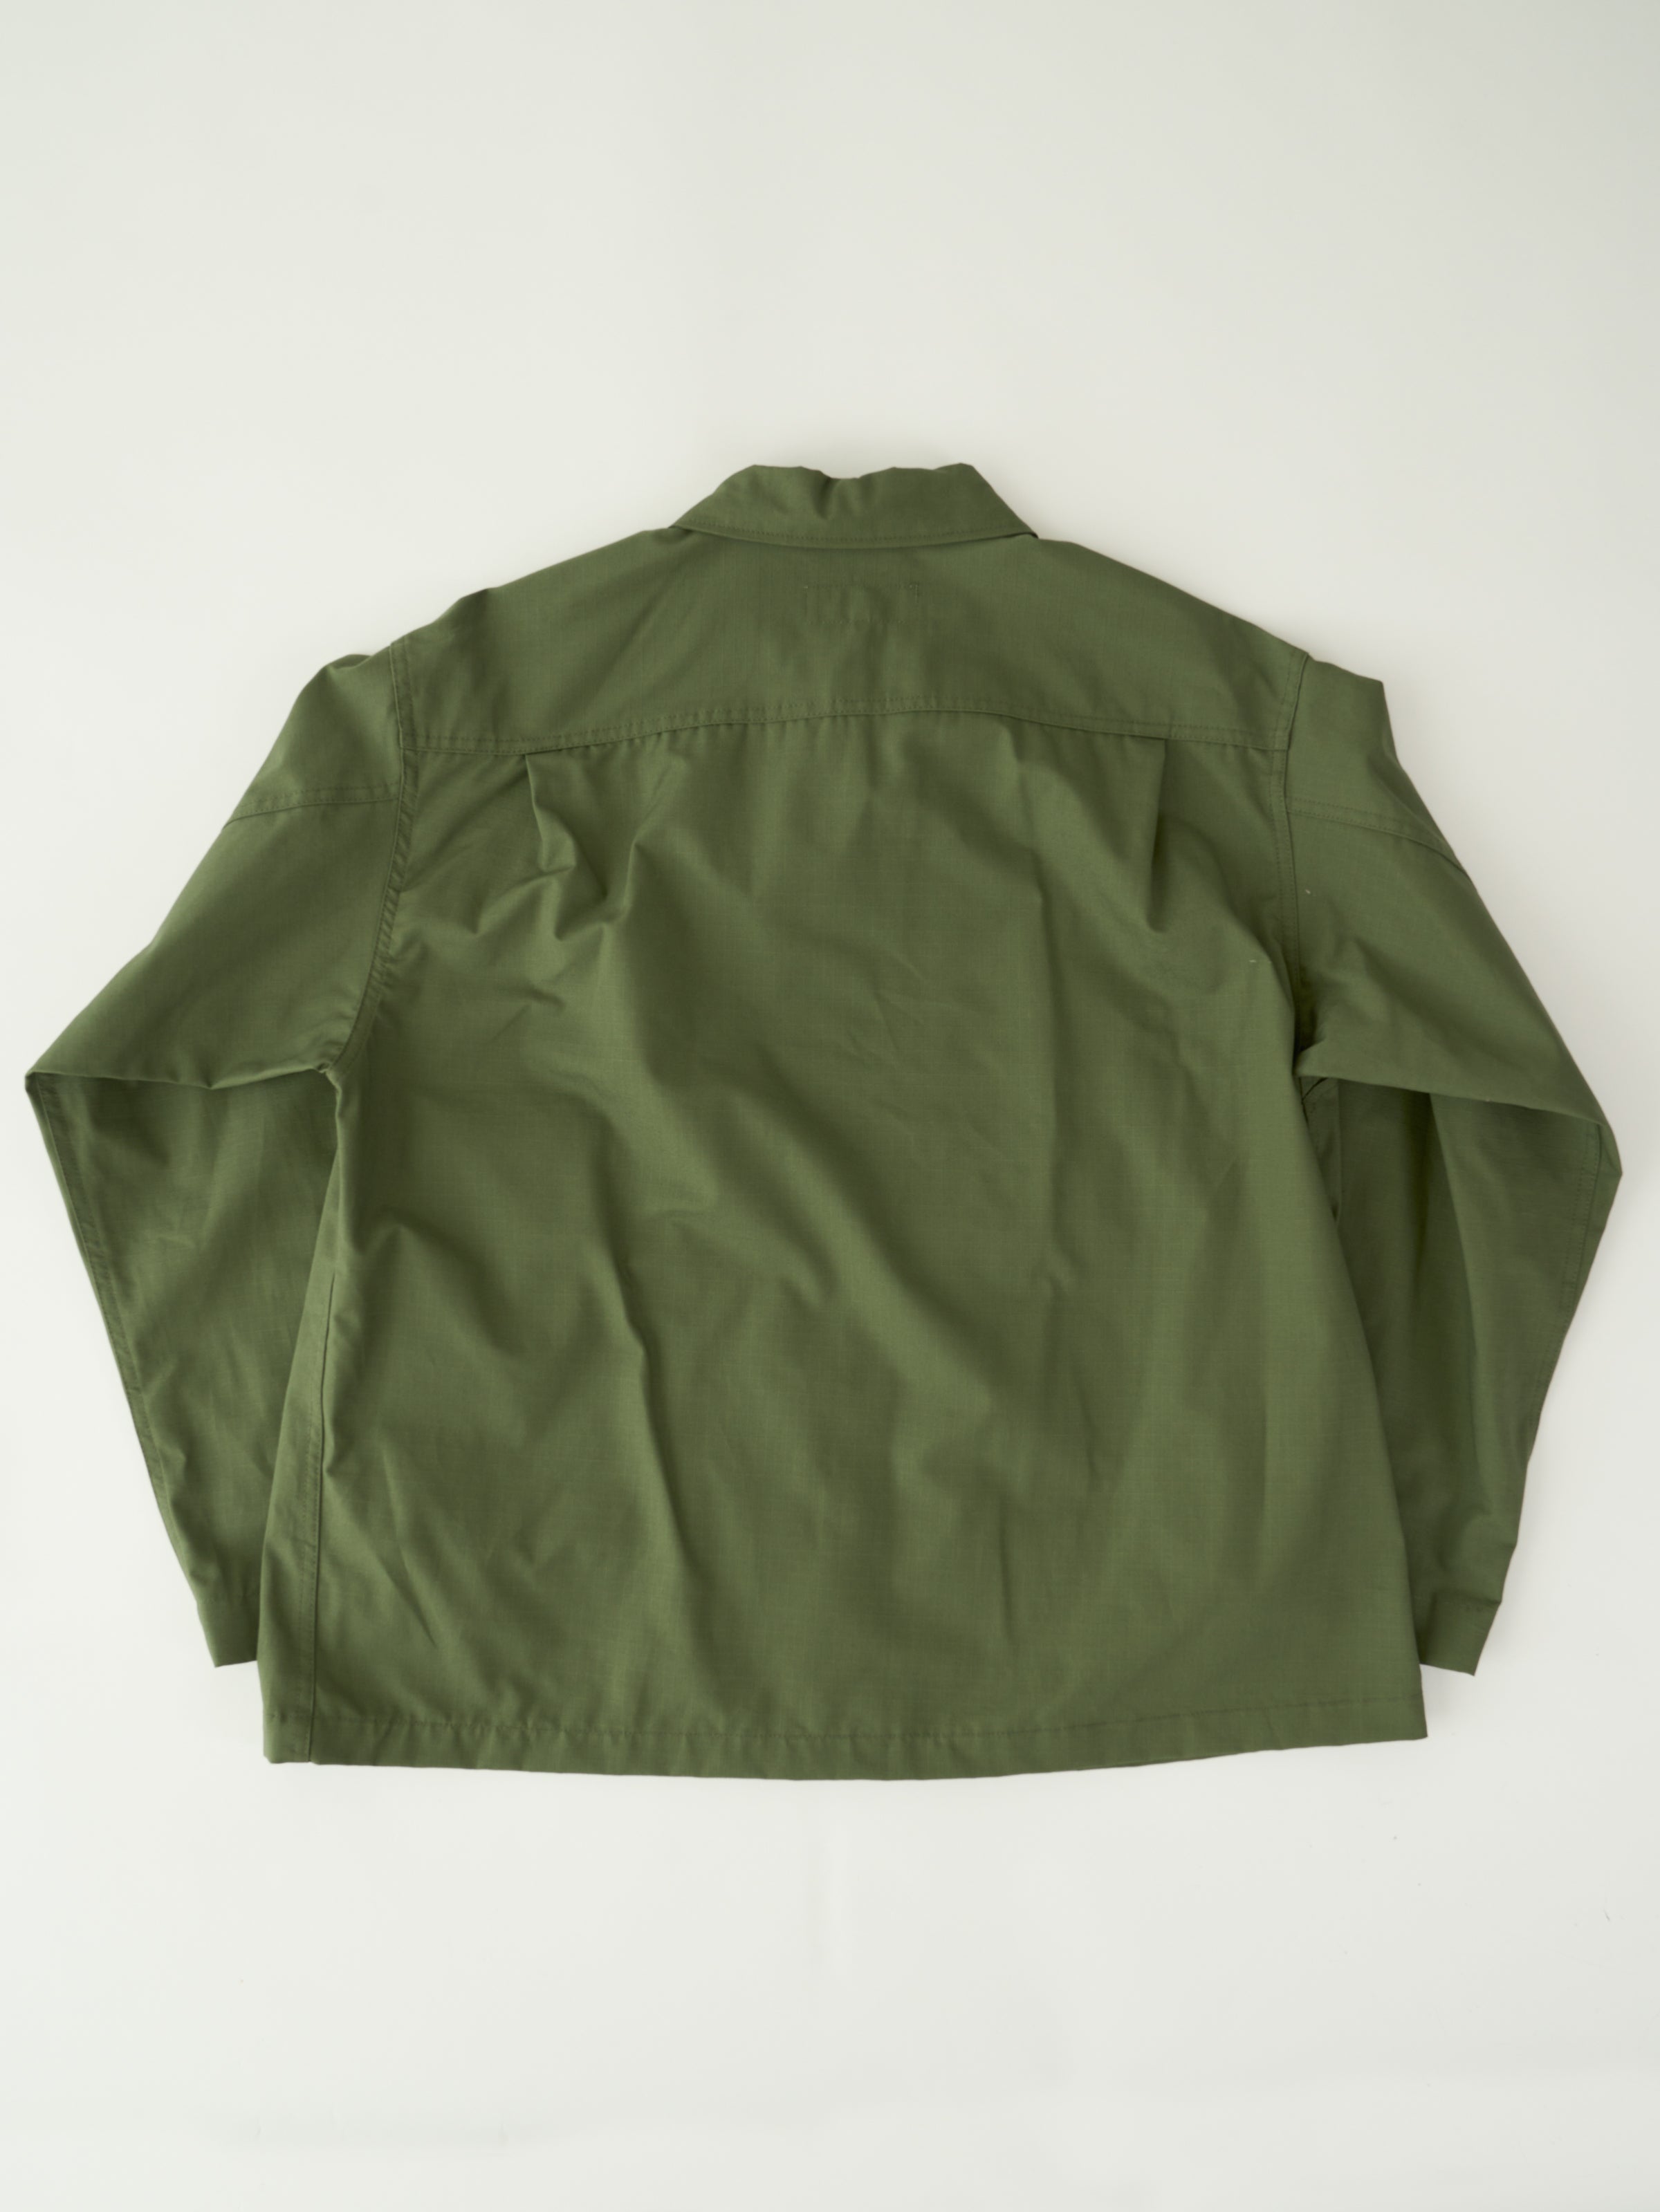 Sea Bees Jacket - Olive Cotton Ripstop